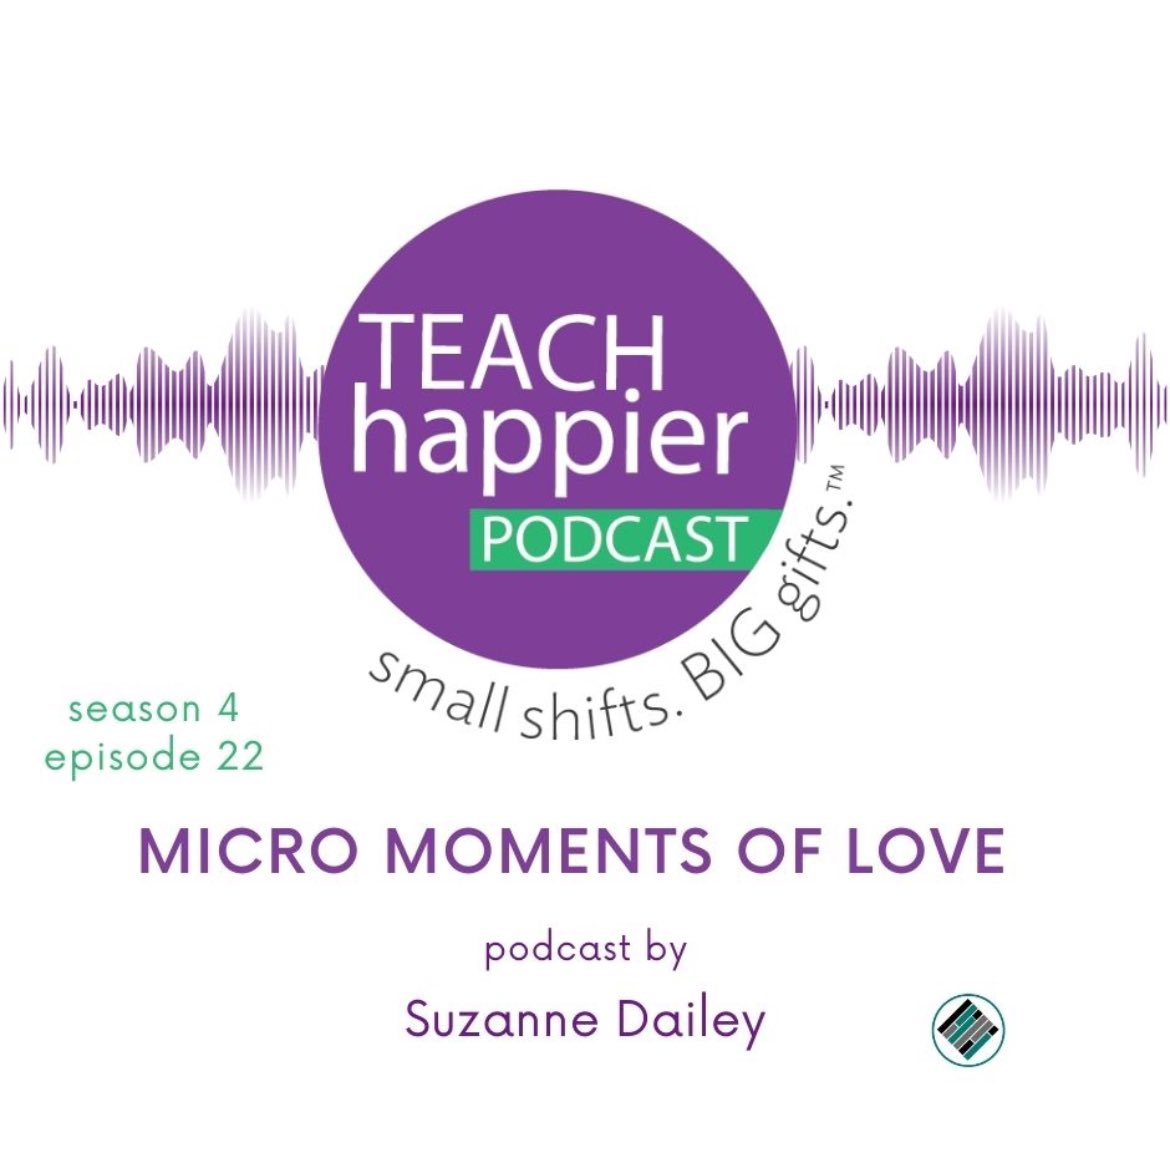 It’s all about L💜VE this week! Let’s learn how we can maximize micro moments of connection to show our people how much they mean to us in a simple, genuine way. Thanks for listening! podcasts.apple.com/us/podcast/tea…